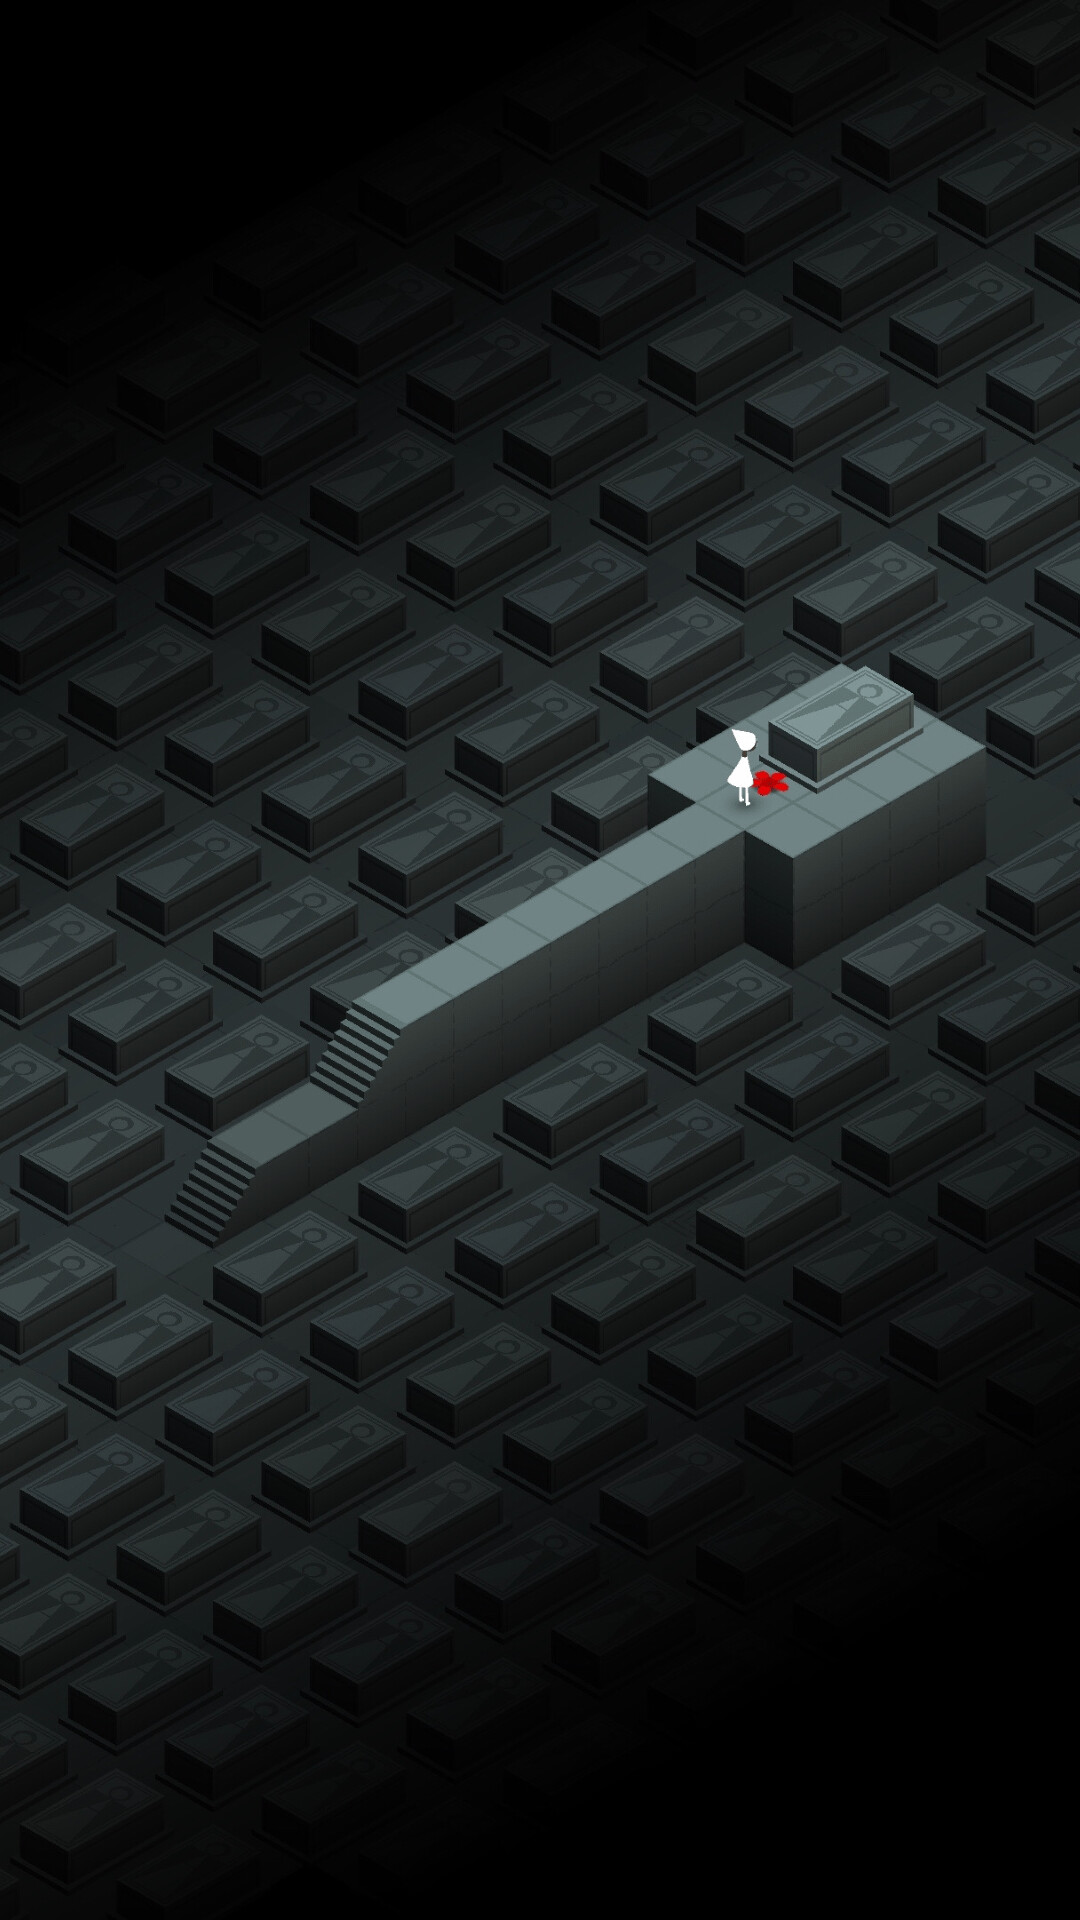 Monument Valley: Ken Wong, the team’s lead designer, created a piece of artwork, an image of a building in isometric view with a single figure, staring at its strange but completely possible architecture. 1080x1920 Full HD Background.